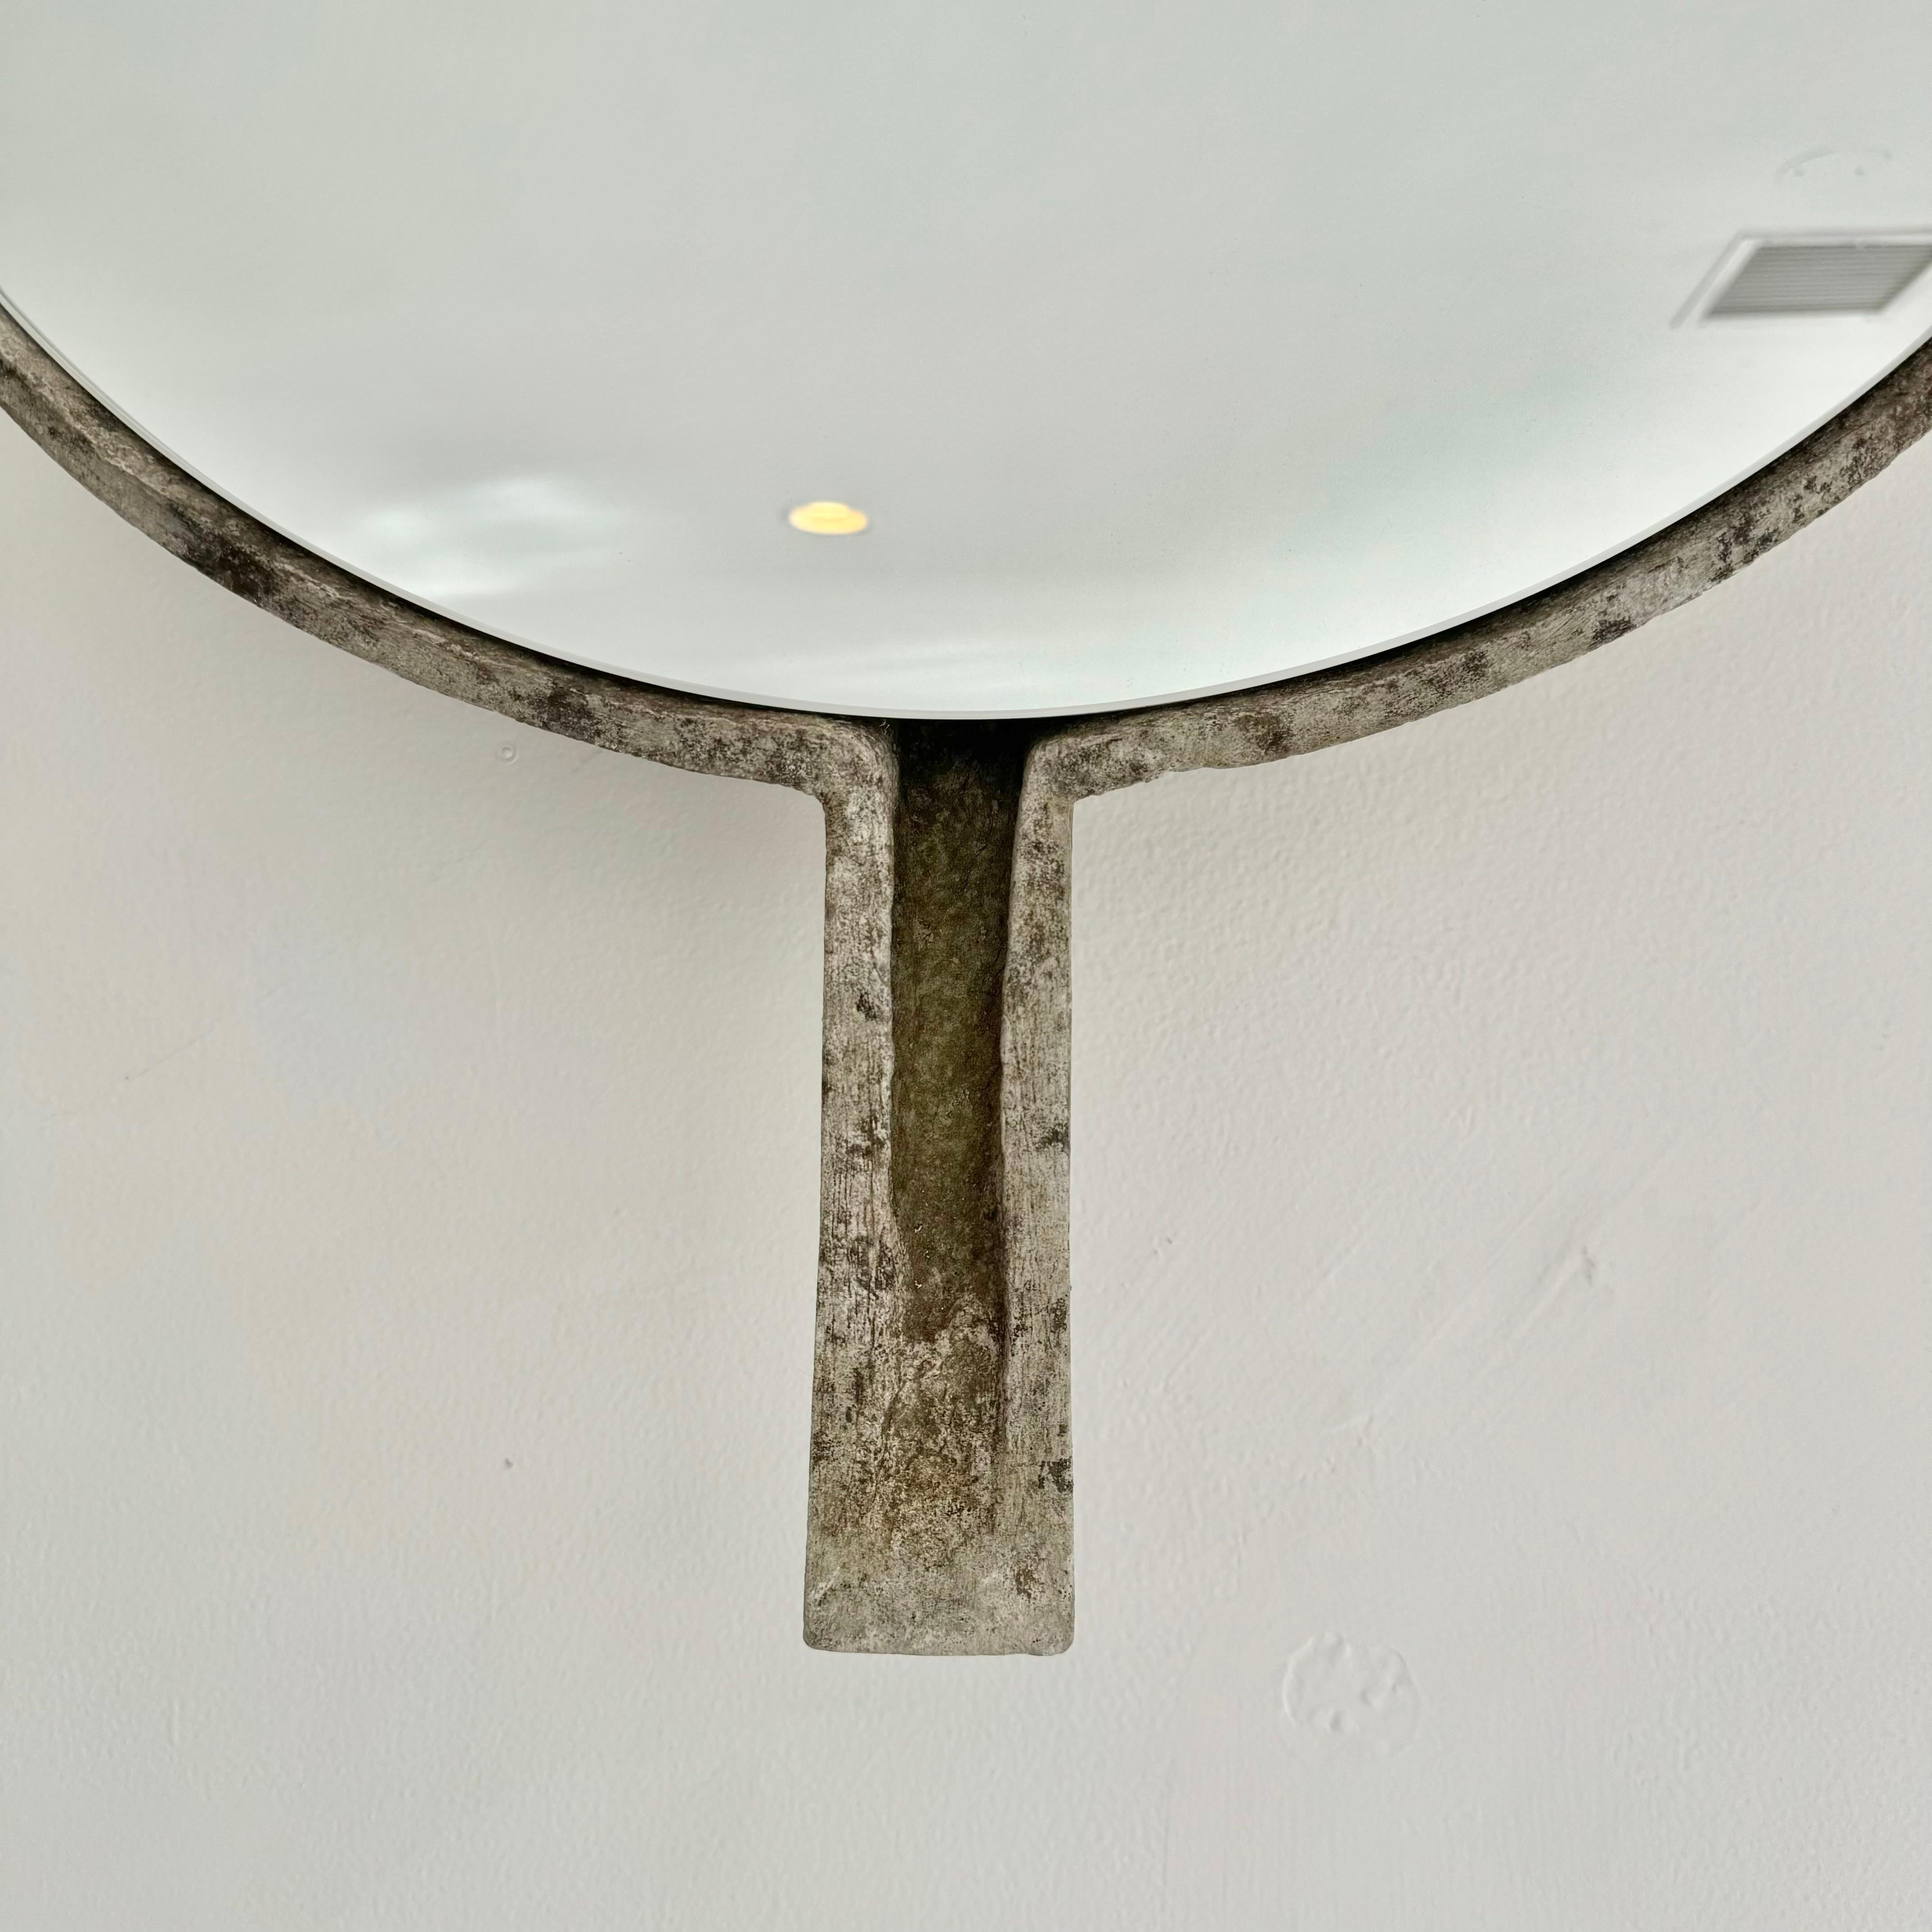 Willy Guhl Concrete Mirror with Spikes, 1960s Switzerland In Good Condition For Sale In Los Angeles, CA